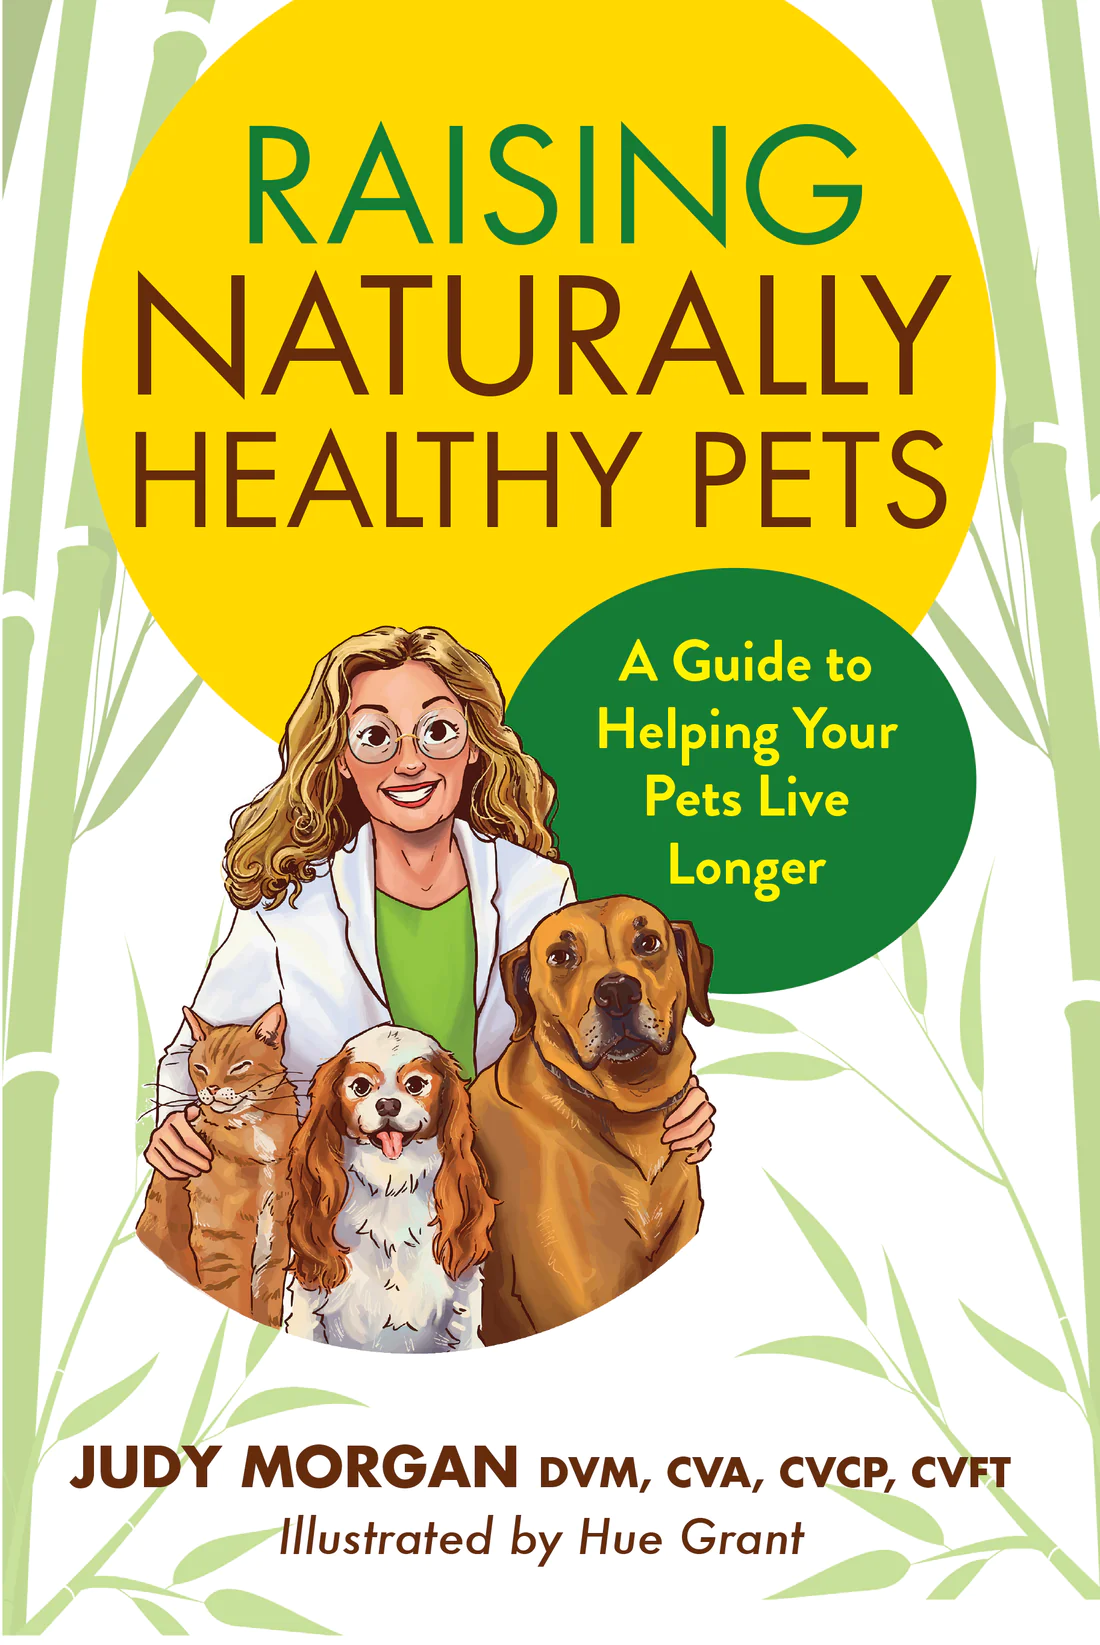 Dr Judy Morgan Raising Naturally Healthy Pets - A Guide to Helping Your Pets Live Longer 01